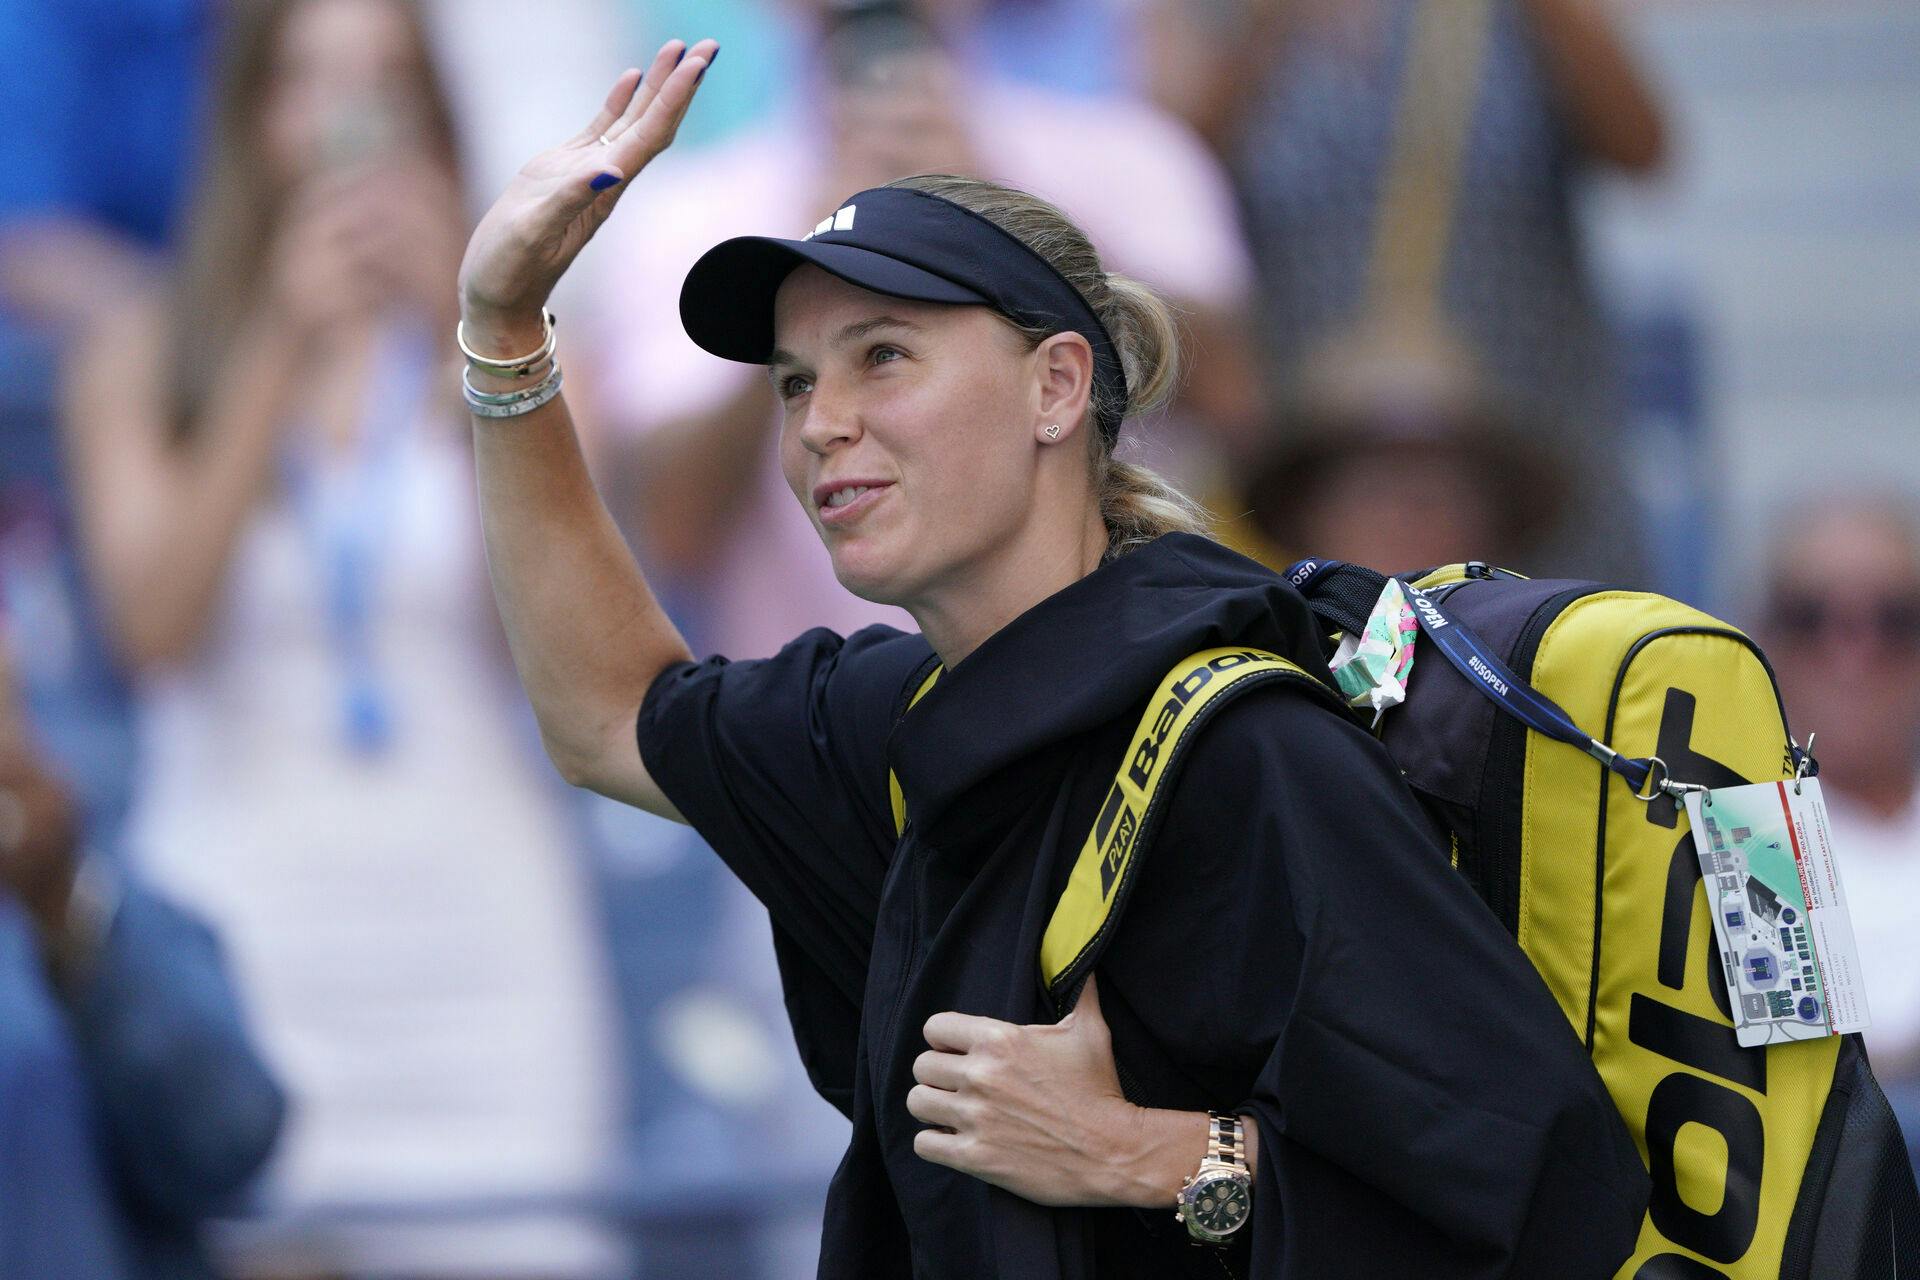 Caroline Wozniacki, of Denmark, waves while arriving on court to face Coco Gauff, of the United States, during the fourth round of the U.S. Open tennis championships, Sunday, Sept. 3, 2023, in New York. (AP Photo/Eduardo Munoz Alvarez)